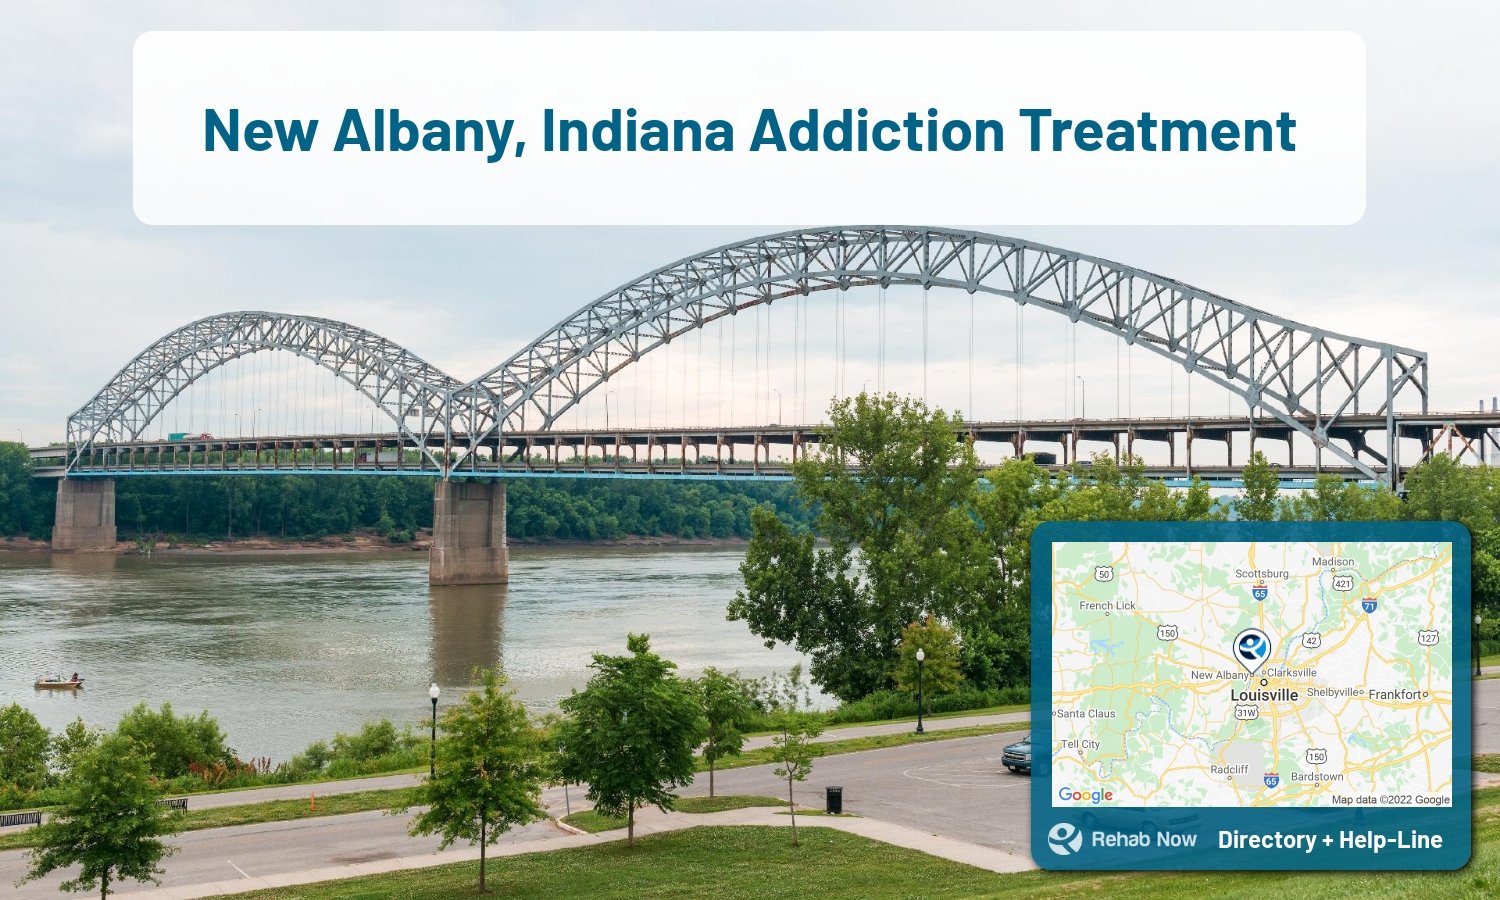 New Albany, IN Treatment Centers. Find drug rehab in New Albany, Indiana, or detox and treatment programs. Get the right help now!